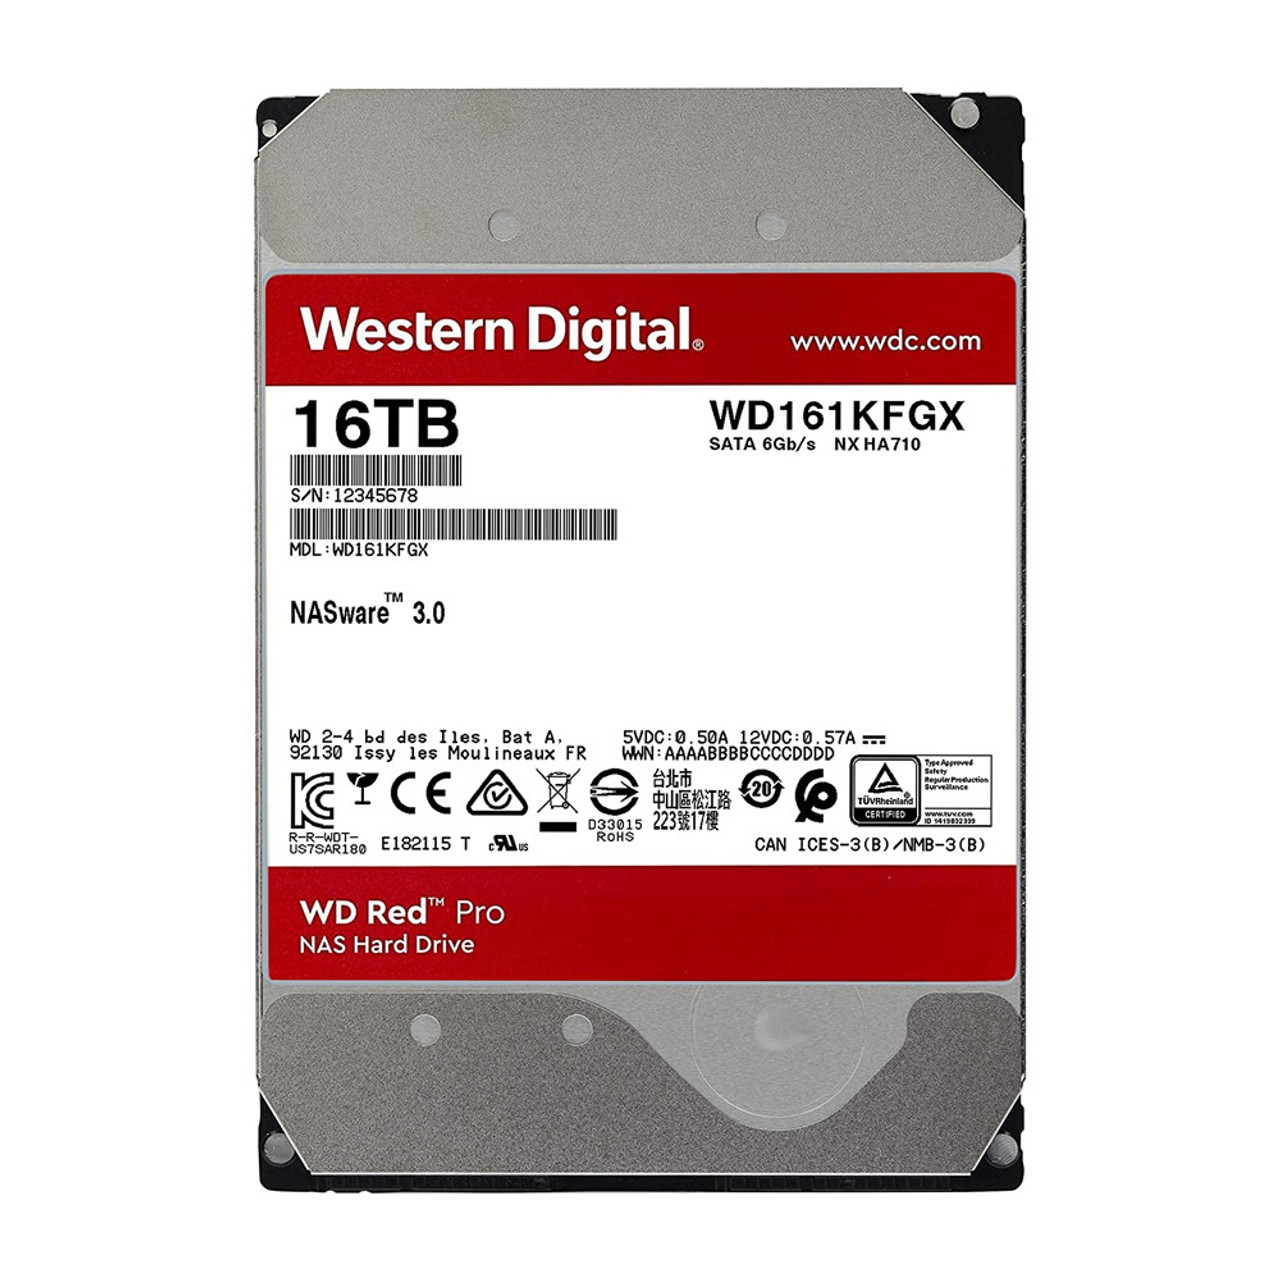 WD 16TB WD Red Pro NAS Internal Hard Drive HDD WD161KFGX (Pack of 2)